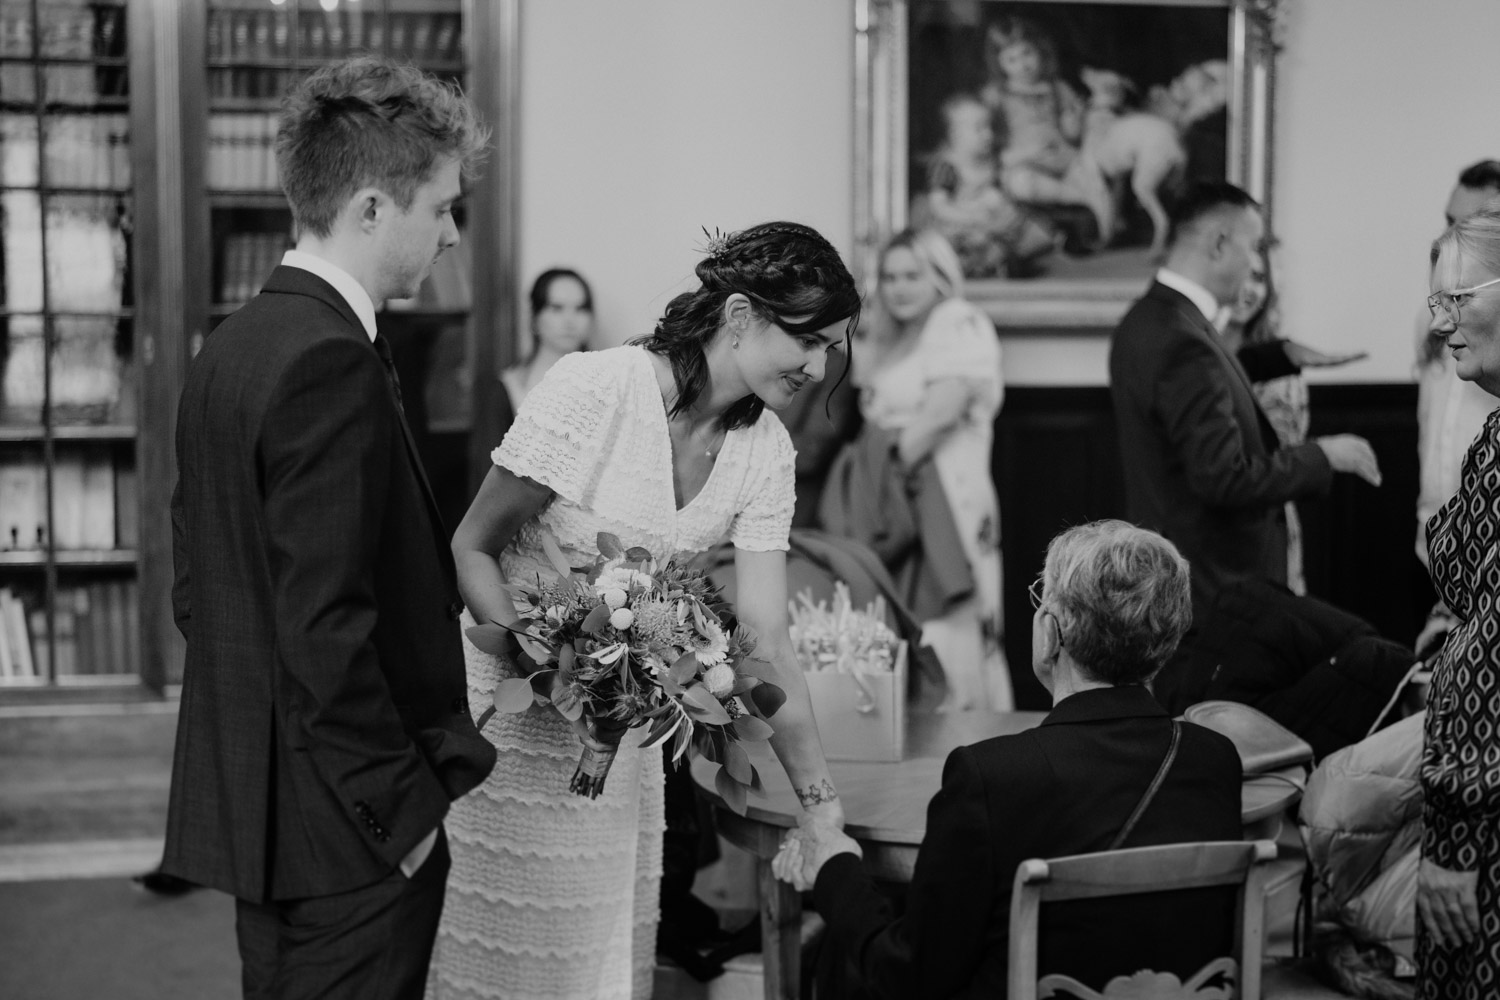 A bride talks to her old grand mother at a urban wedding in Basel, Switzerland